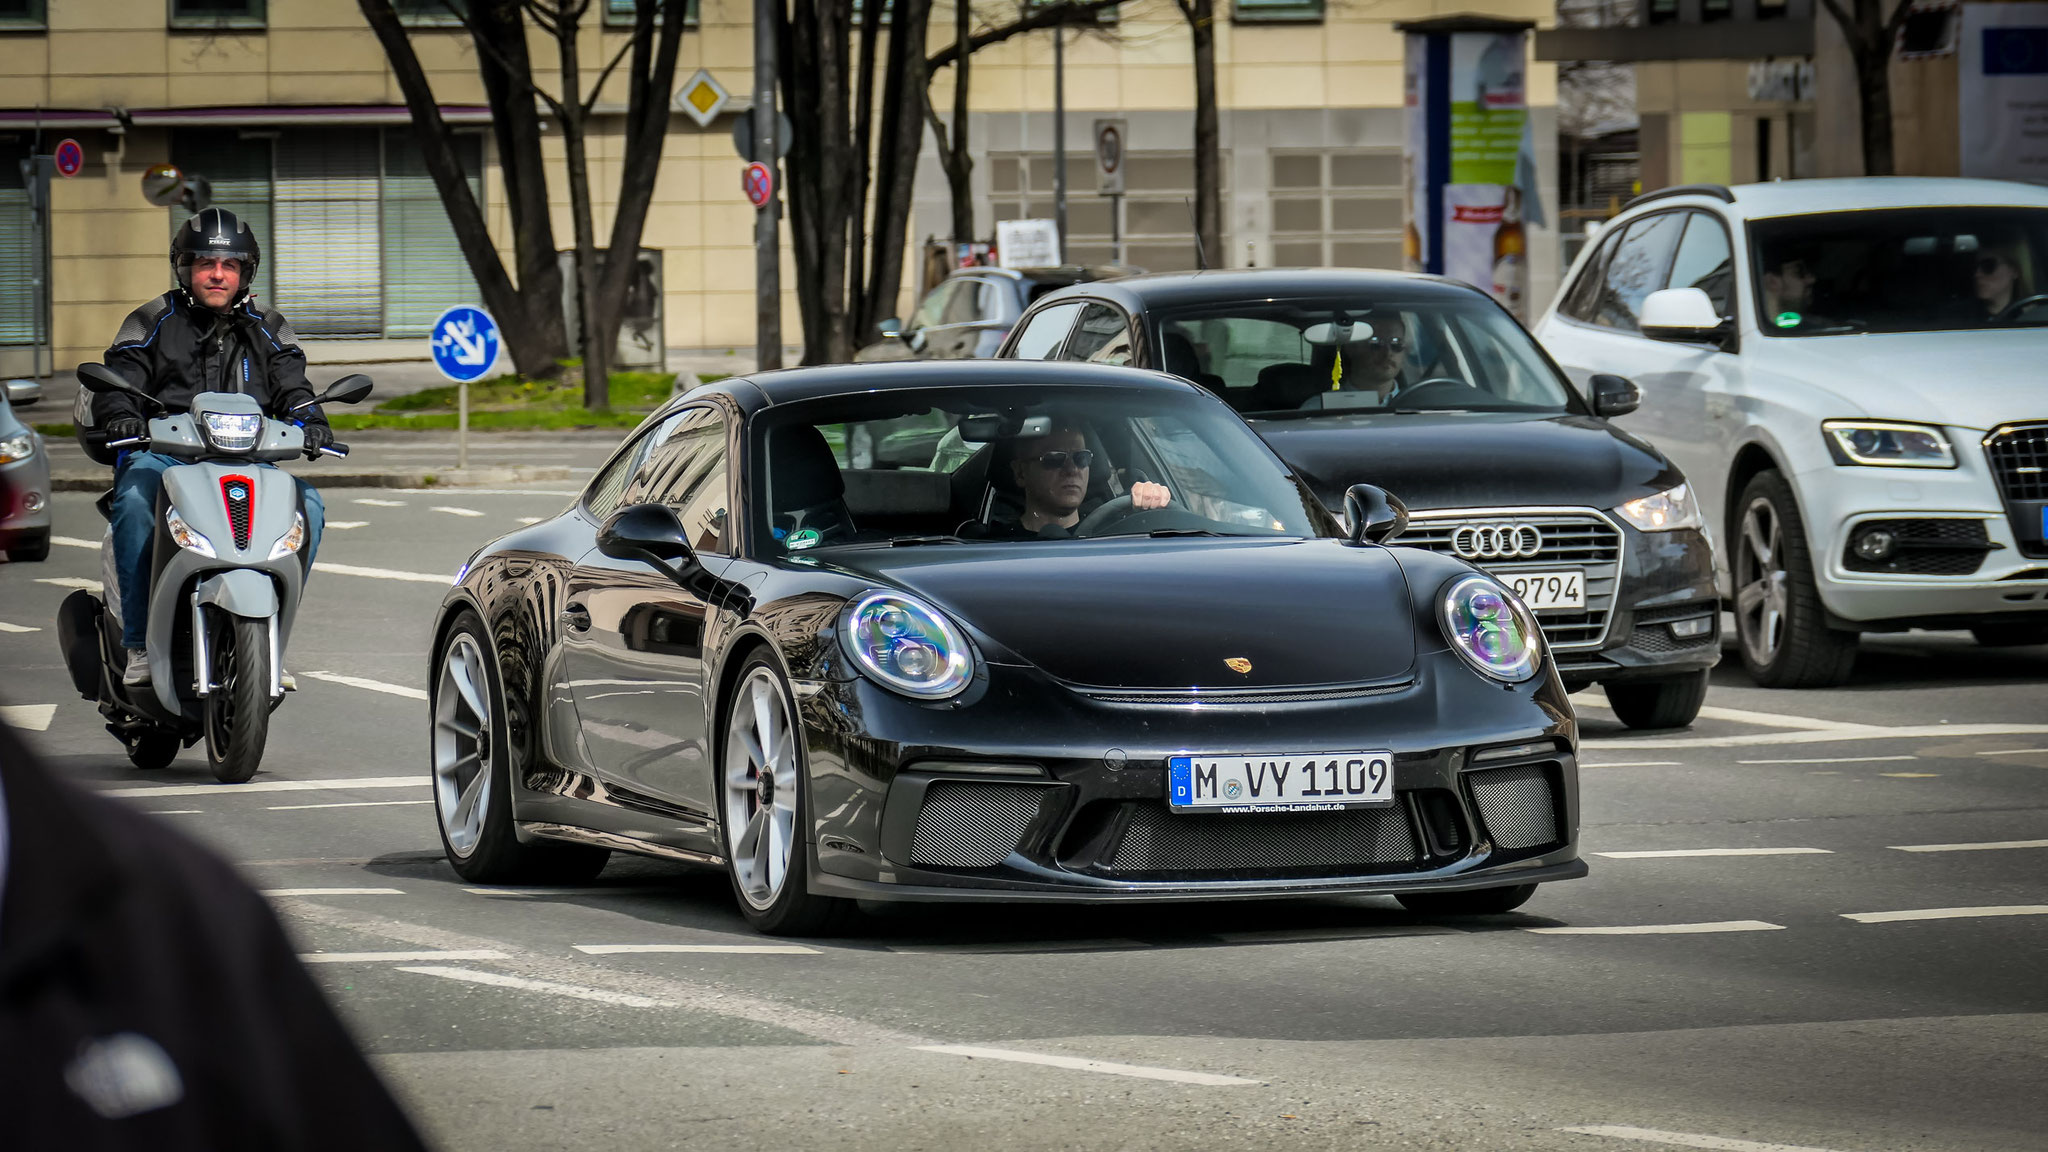 Porsche 991 GT3 Touring Package - M-VY-1109